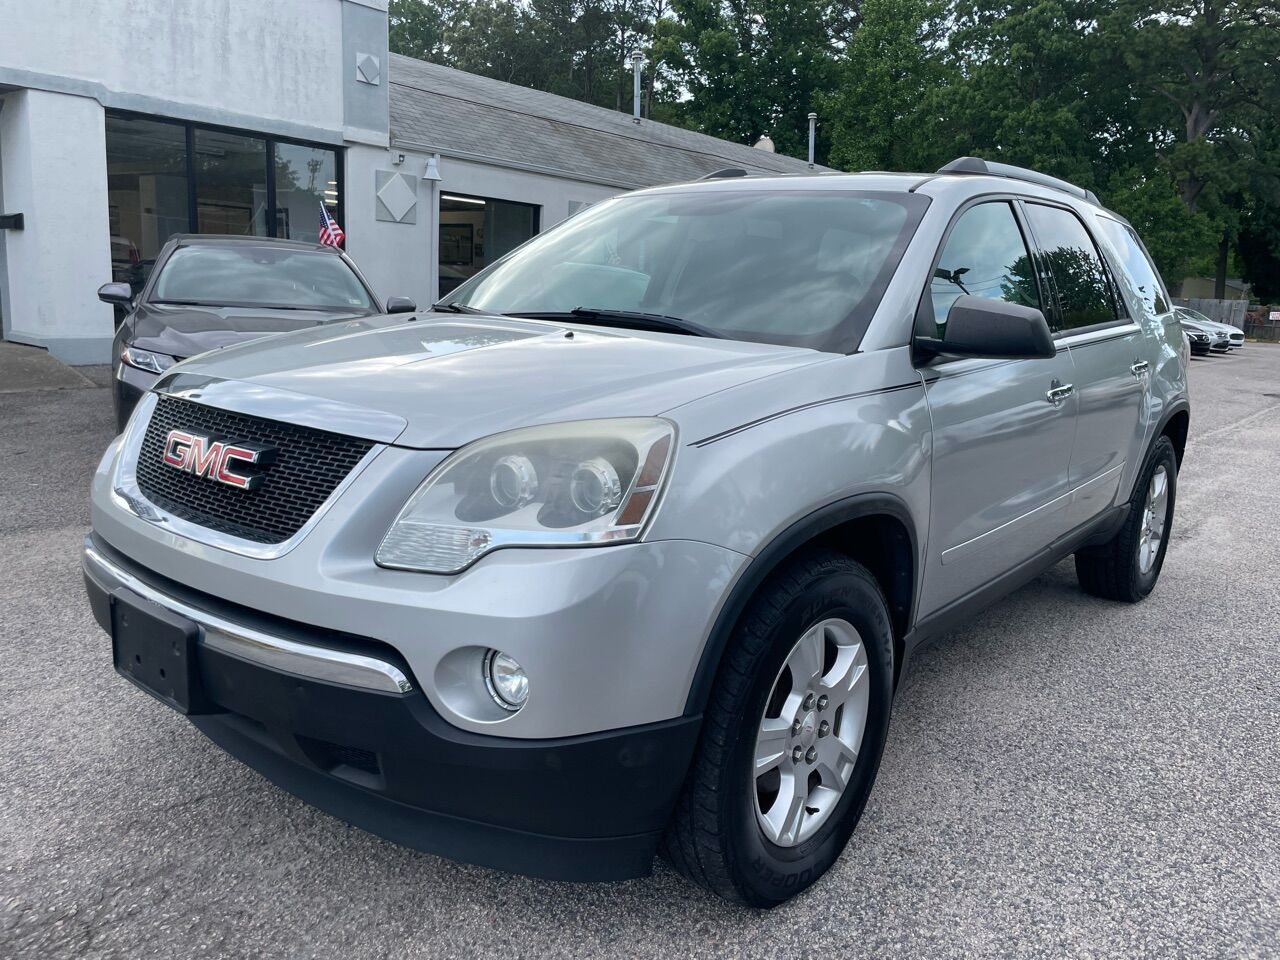 2012 Silver GMC Acadia For Sale